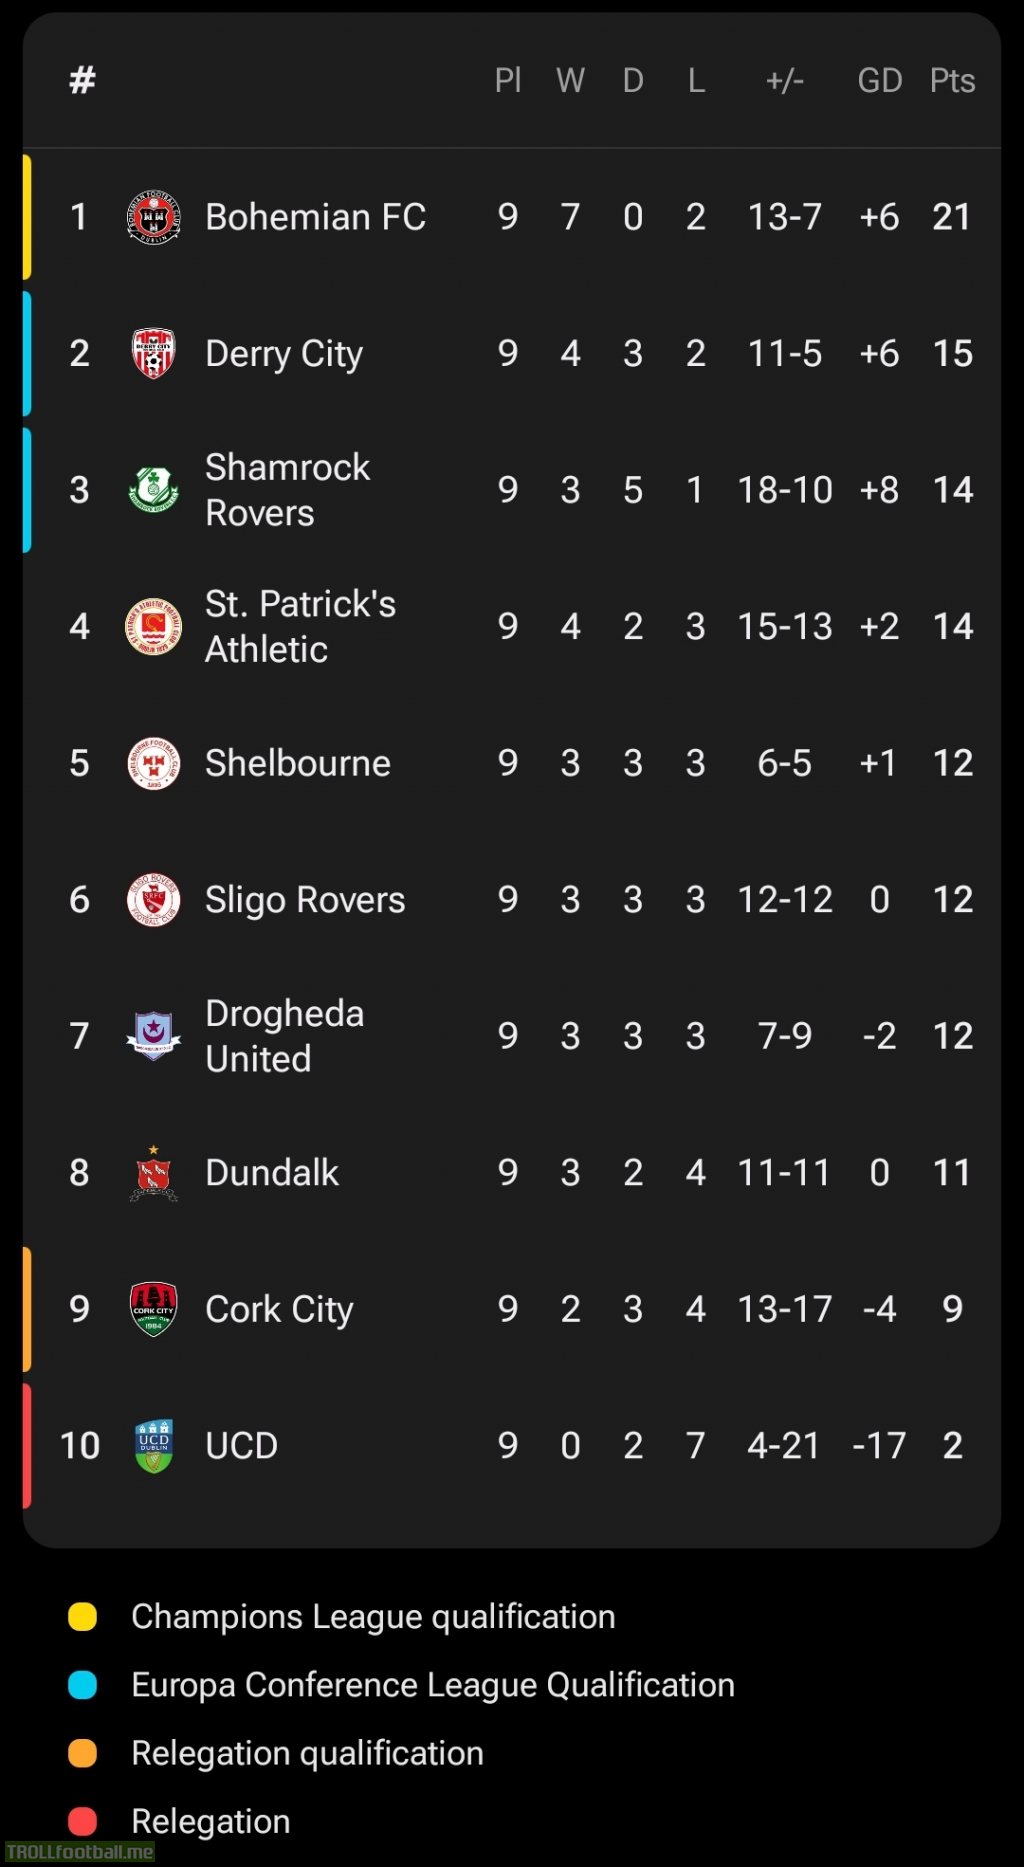 Standings after the first round of fixtures in the League of Ireland Premier Division: Bohemians top by 6 points, 6 points separating 2nd from 2nd bottom